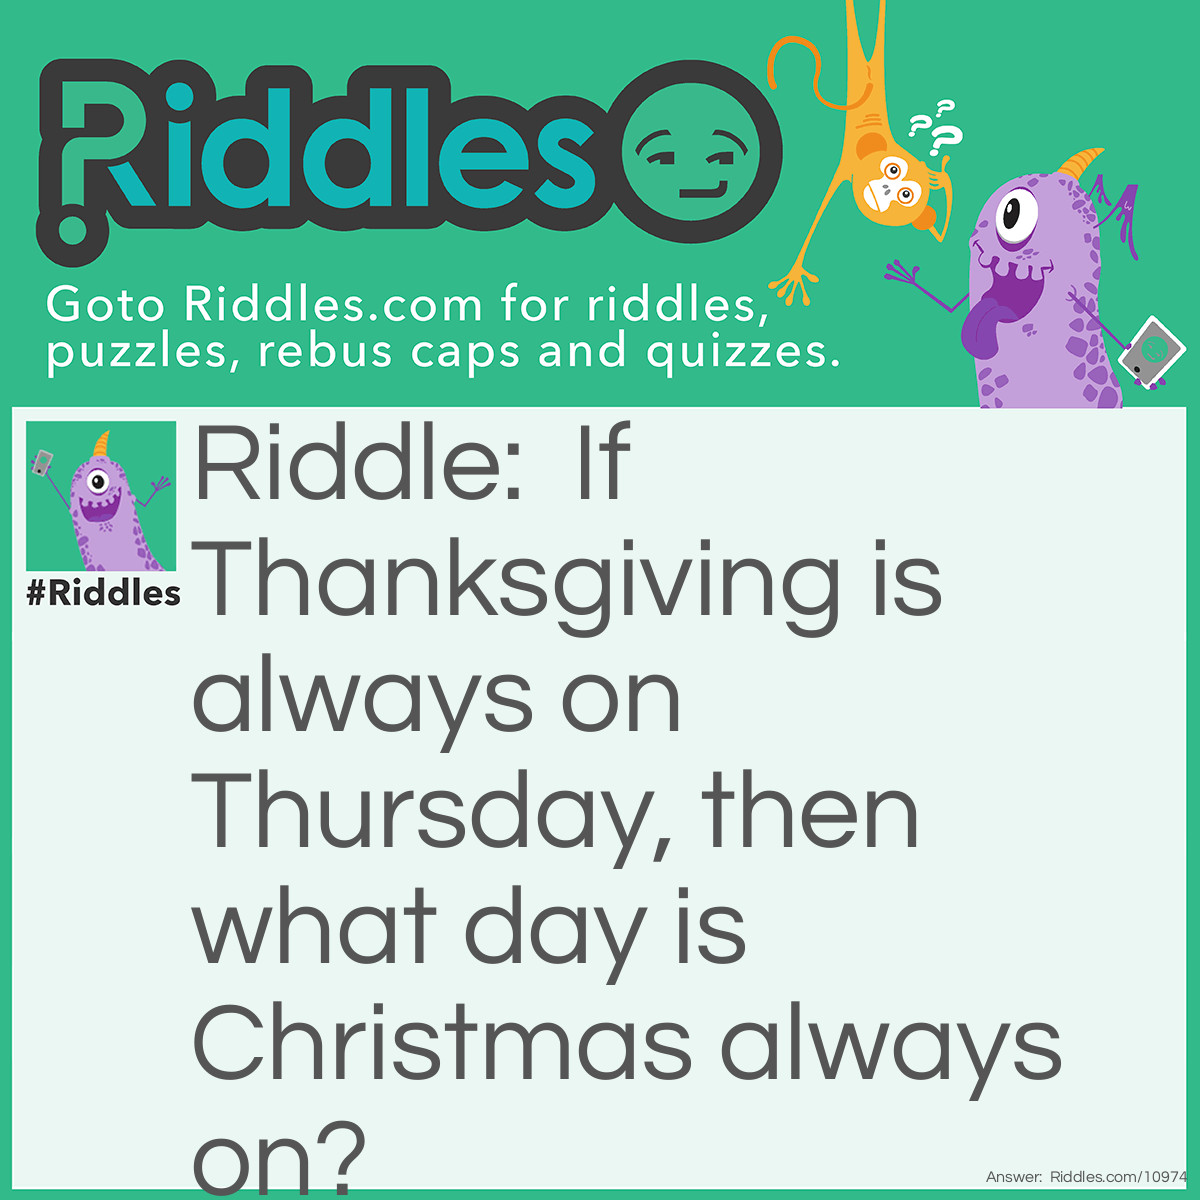 Riddle: If Thanksgiving is always on Thursday, then what day is Christmas always on? Answer: Always December 25th.